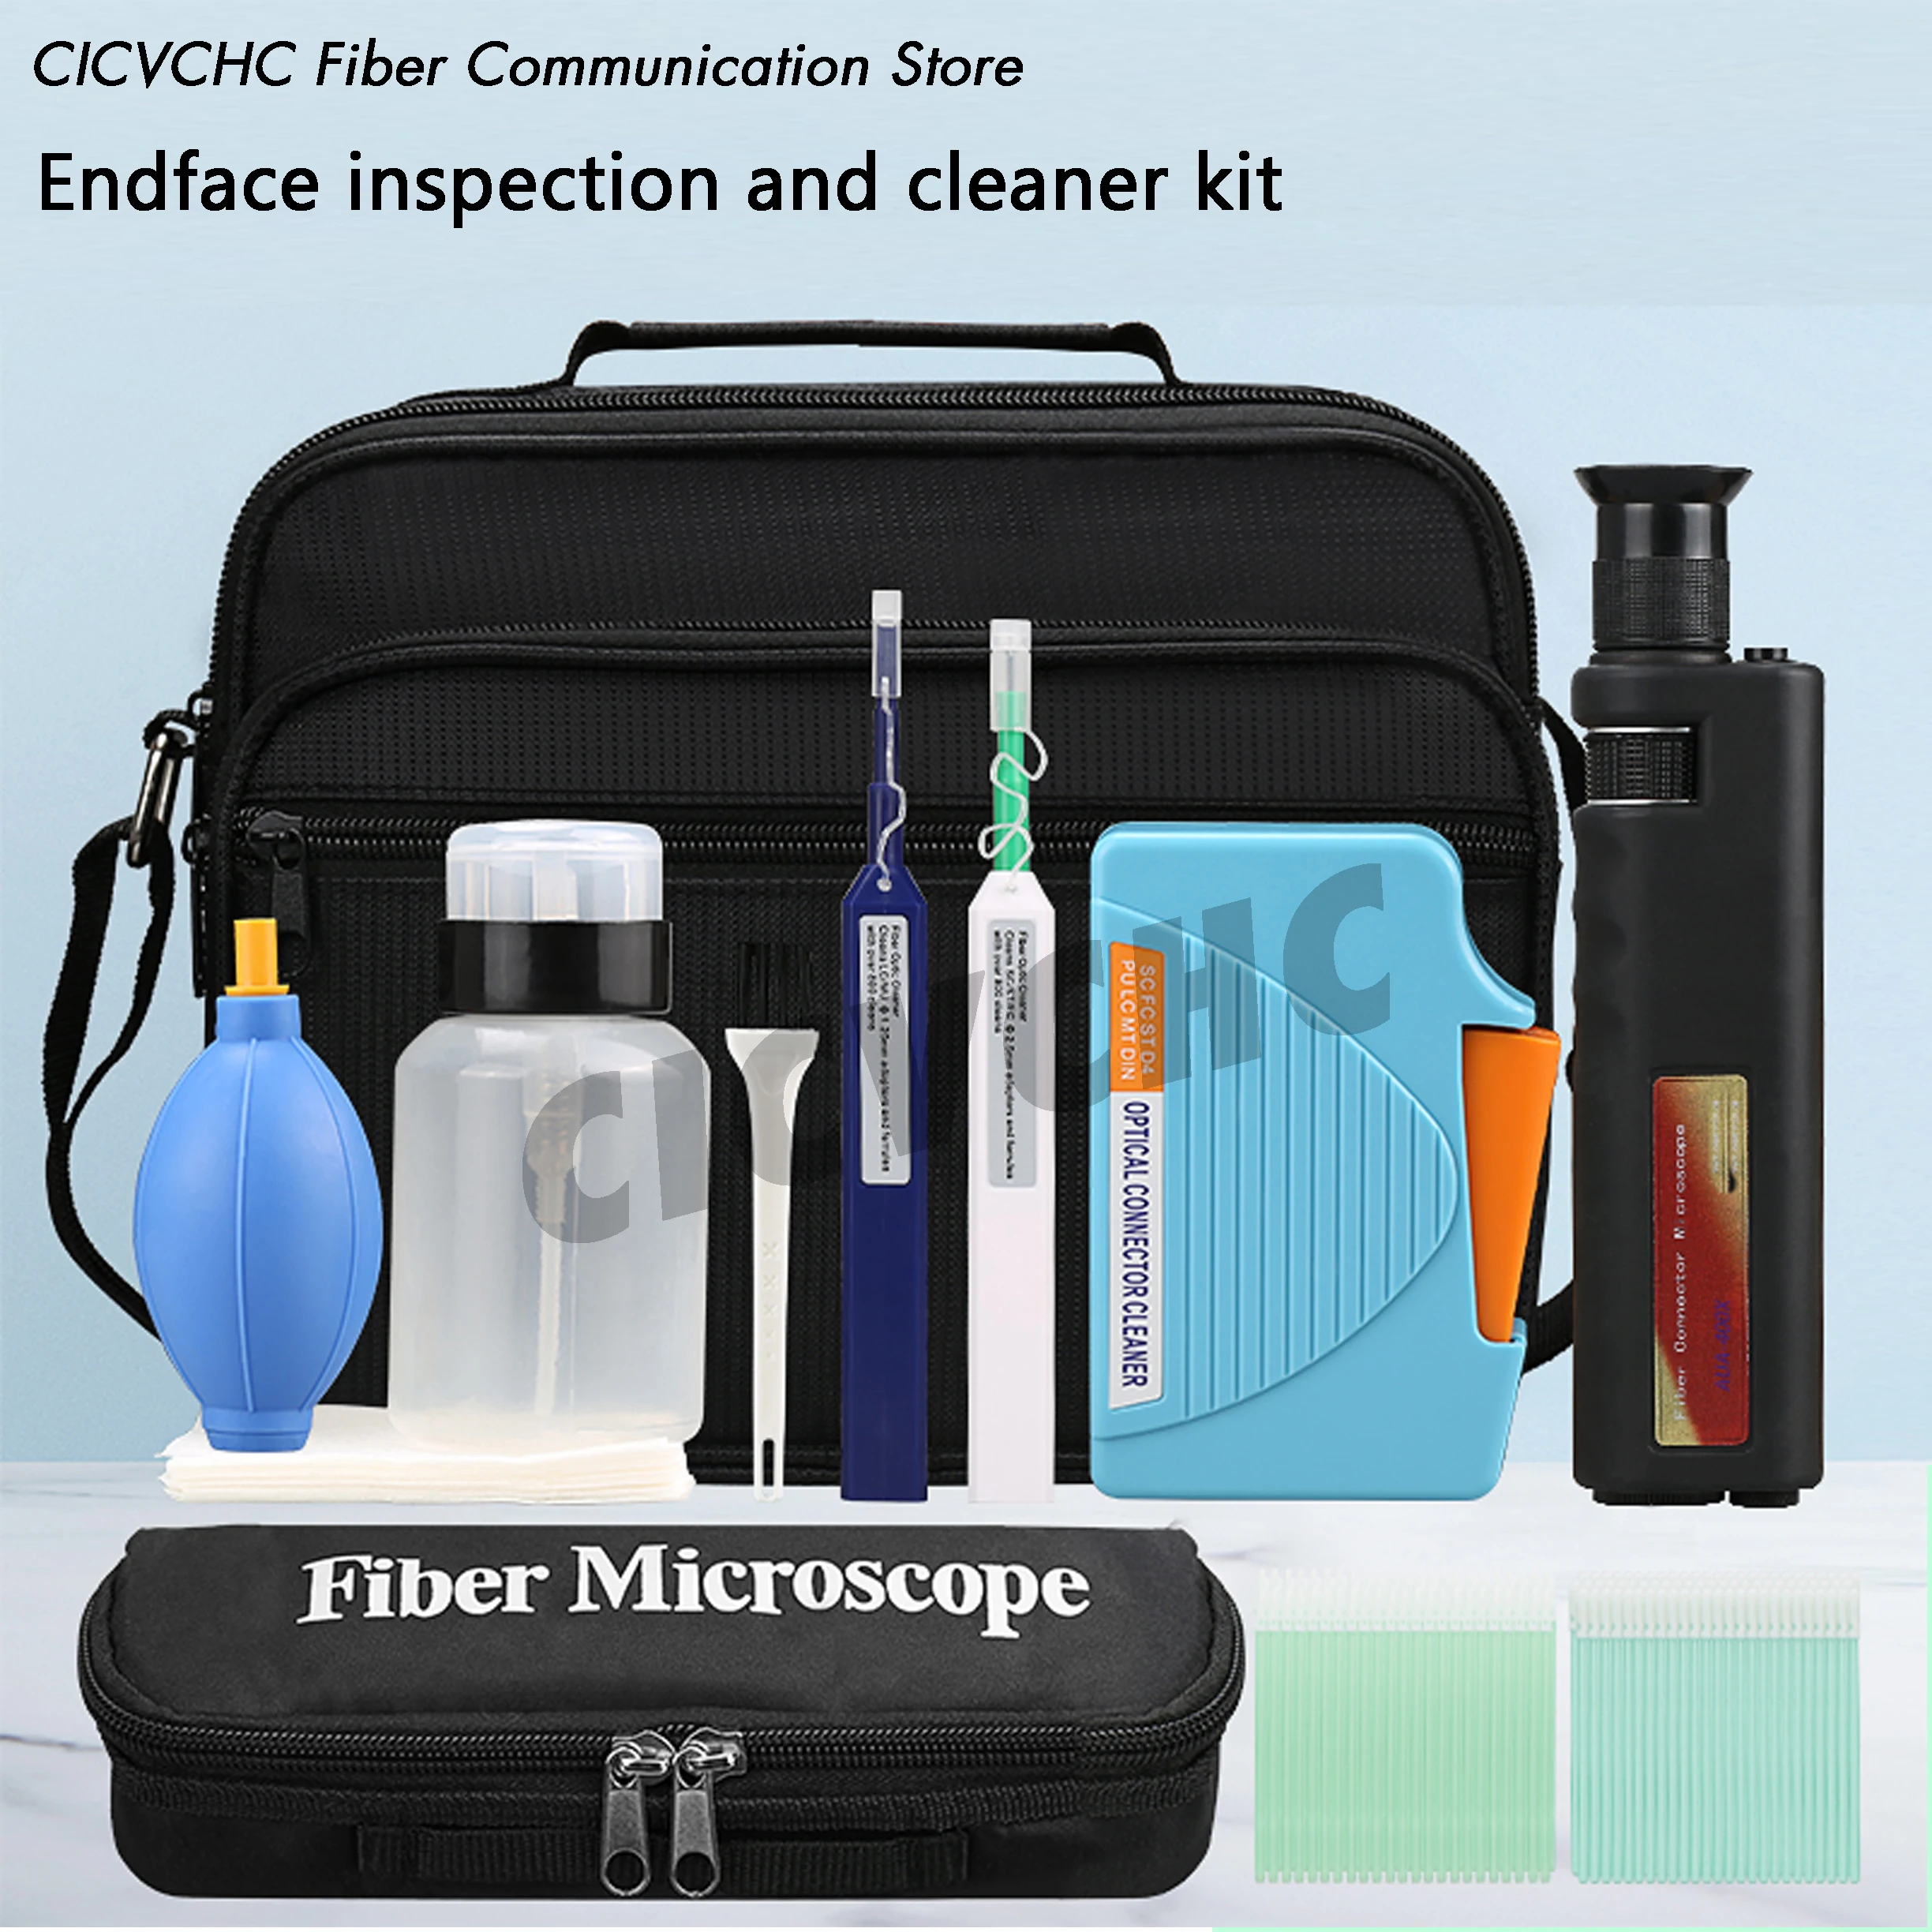 Fiber end-face inspection and cleaner tool kit with 400x fiber microscope (Hand held) handheld 200x 400x fiber optical inspection microscope led illumination anti slip rubber sc fc st lc ftth tool fiber equiment